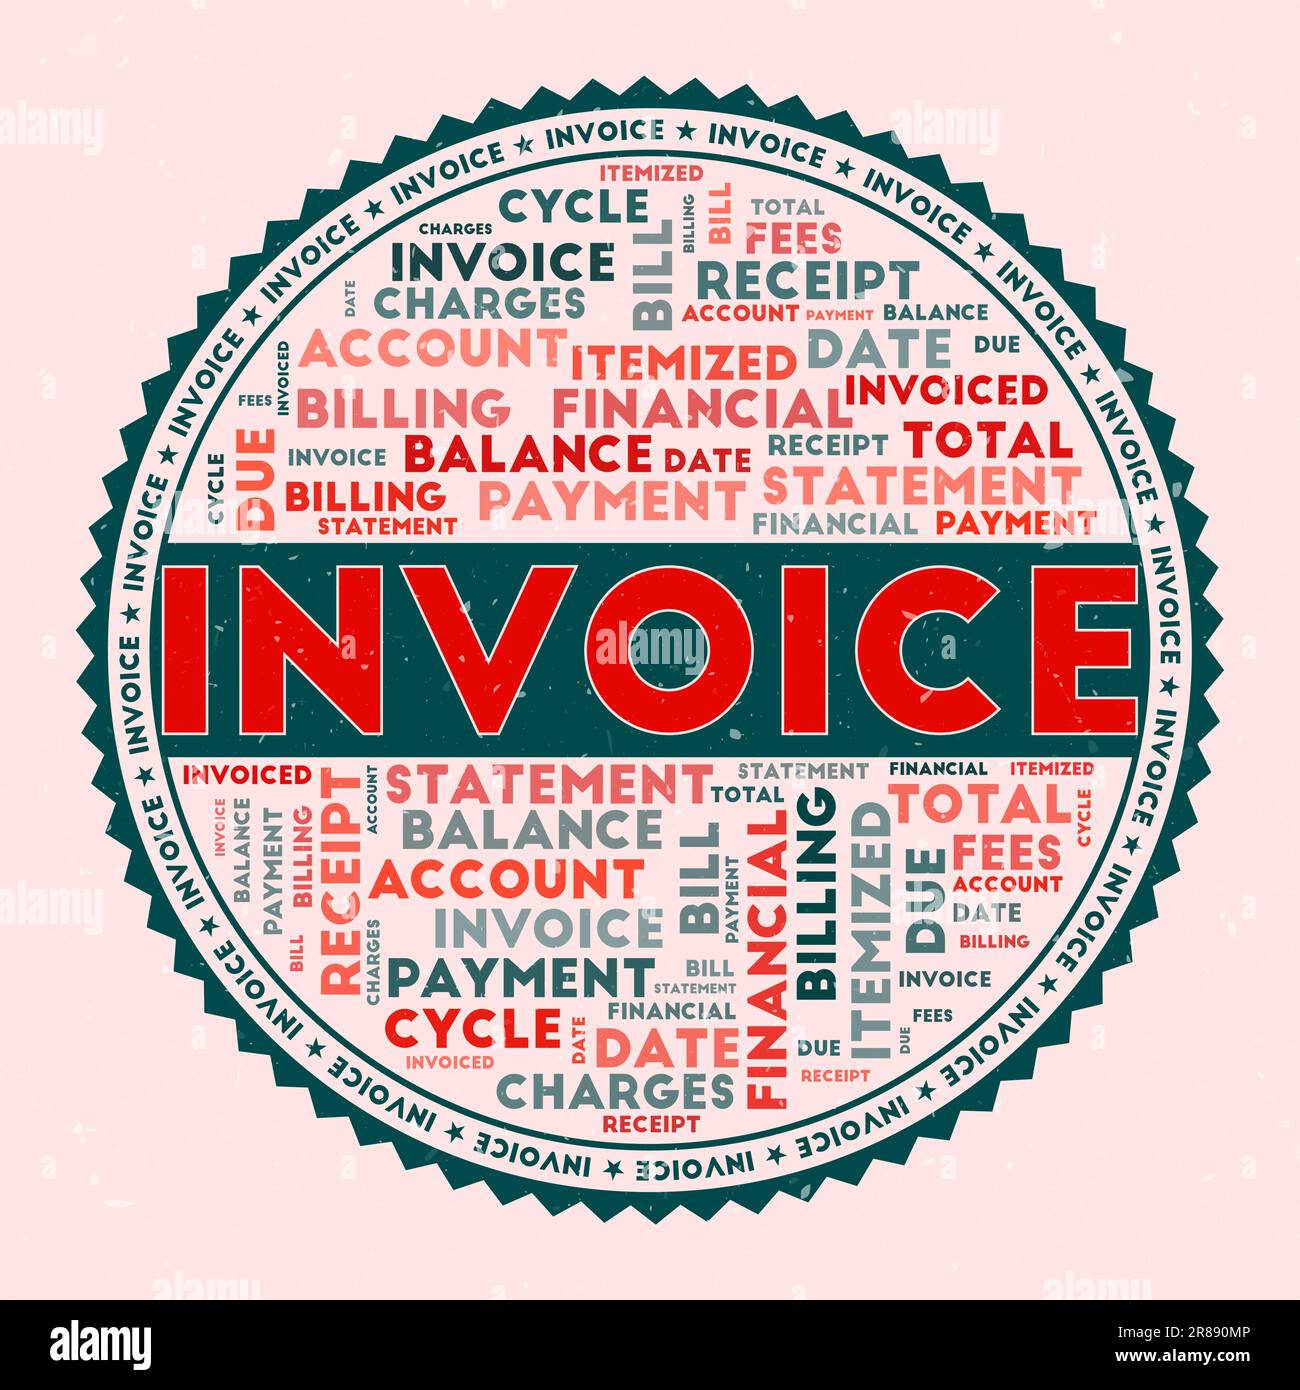 INVOICE word image. Invoice concept with word clouds and round text. Nice colors and grunge texture. Radiant vector illustration. Stock Vector